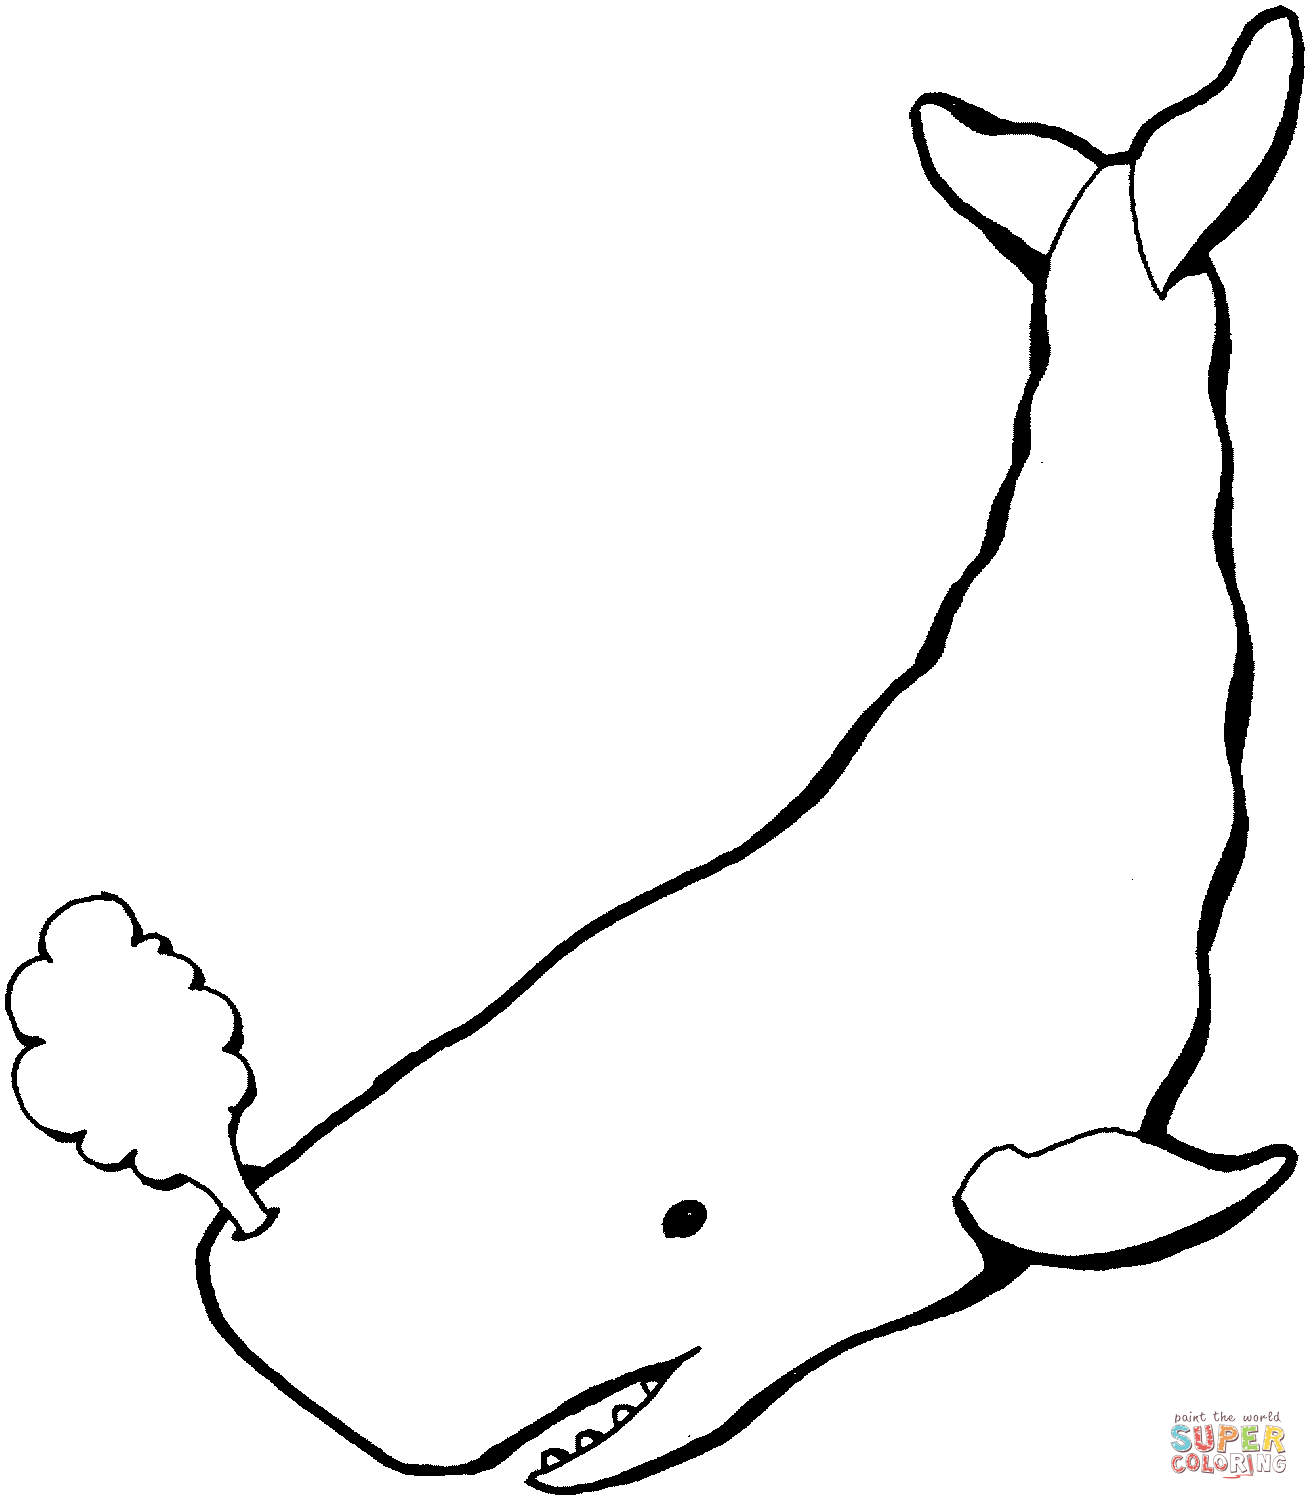 Sperm Whale 5 coloring page | Free Printable Coloring Pages